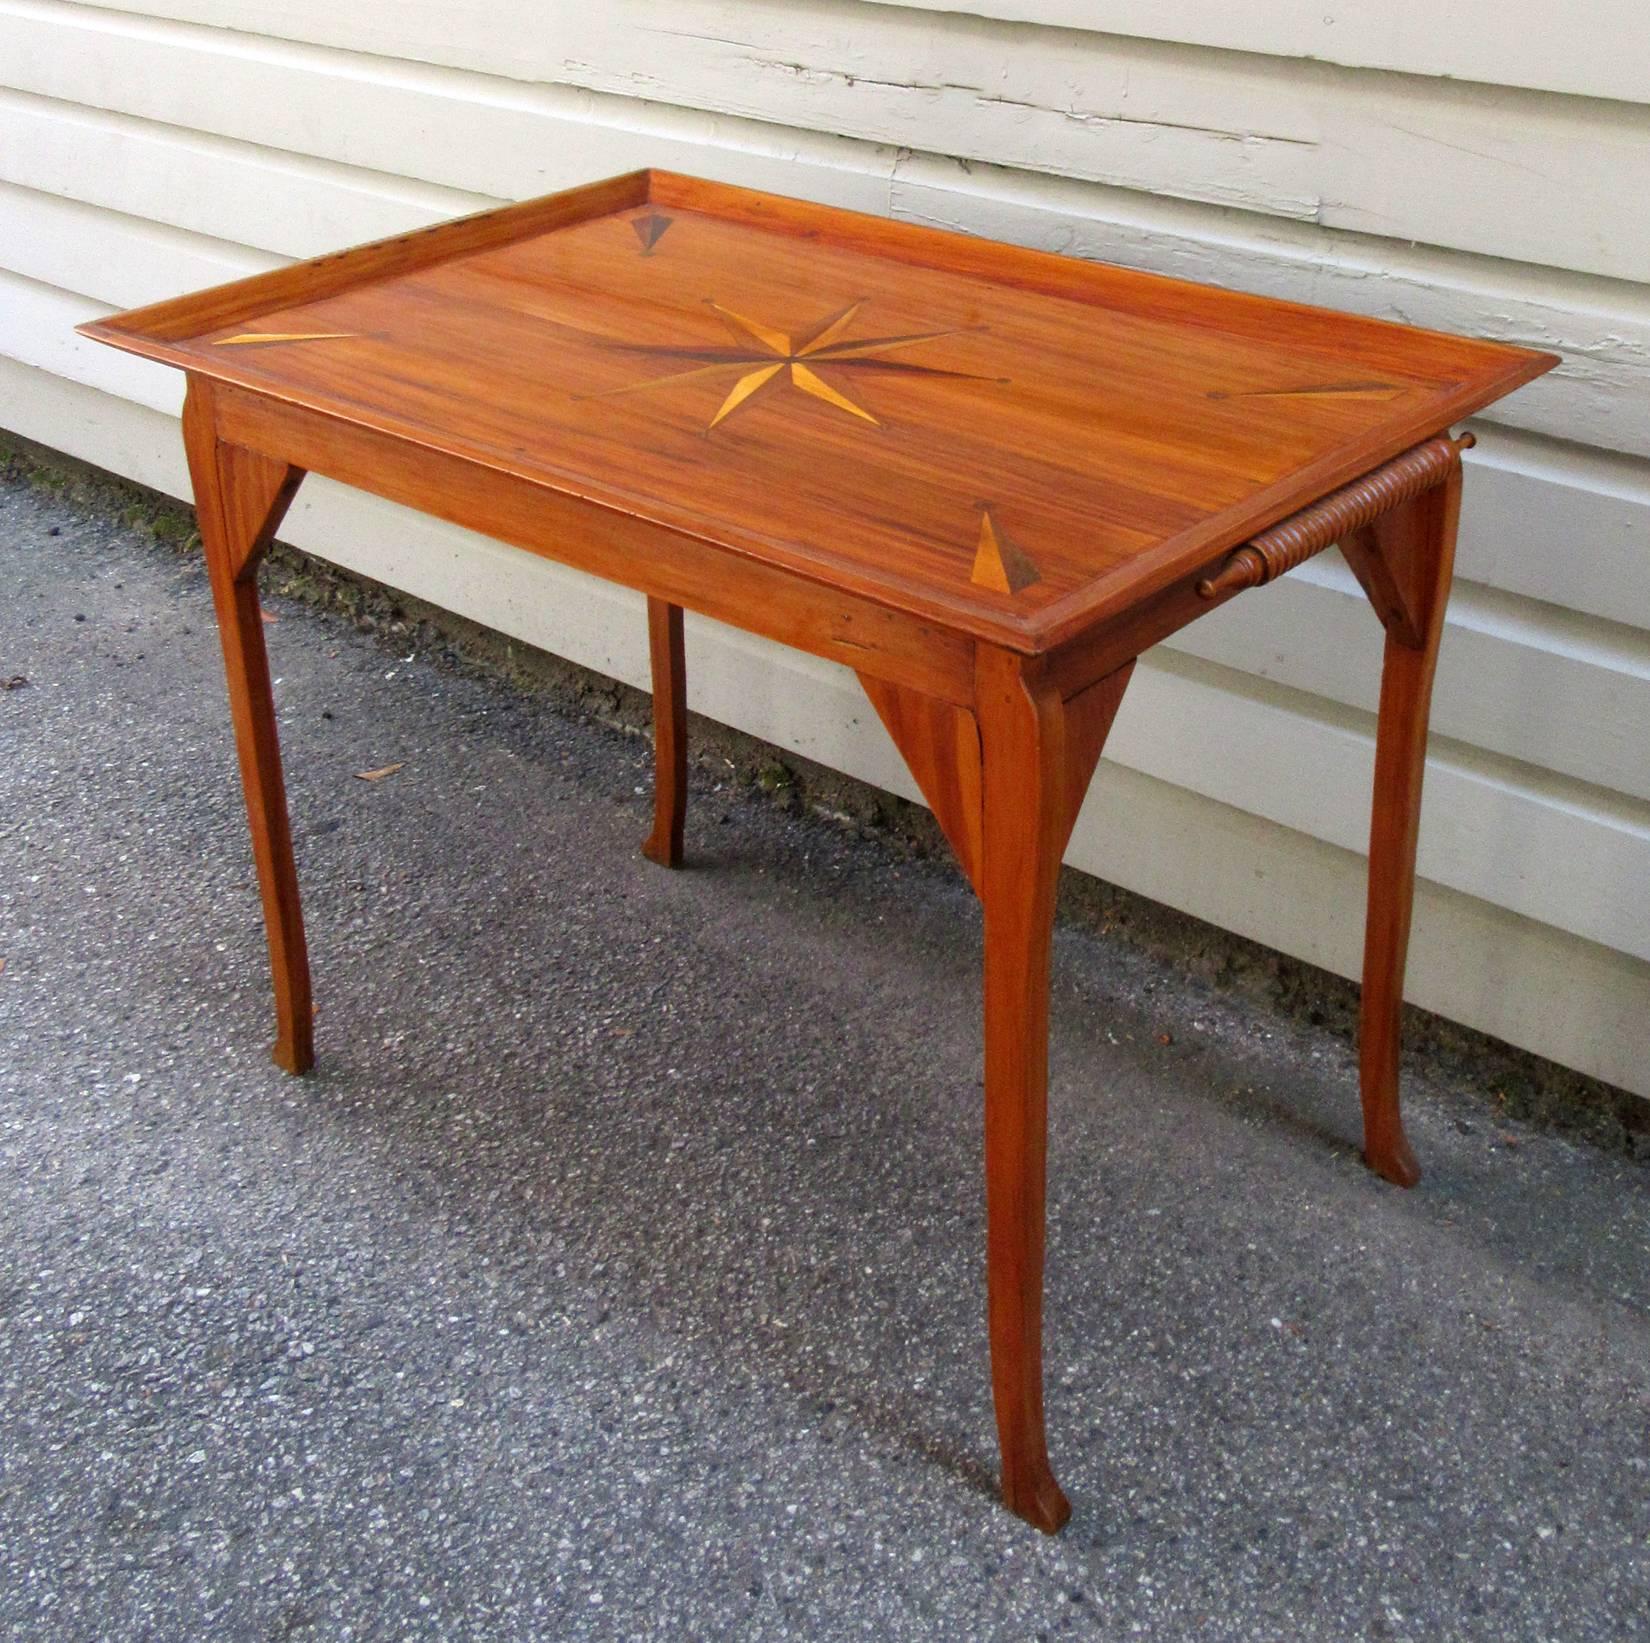 19th Century Jamaican Regency Yucca Tray Table with Exotic Specimen Compass For Sale 5